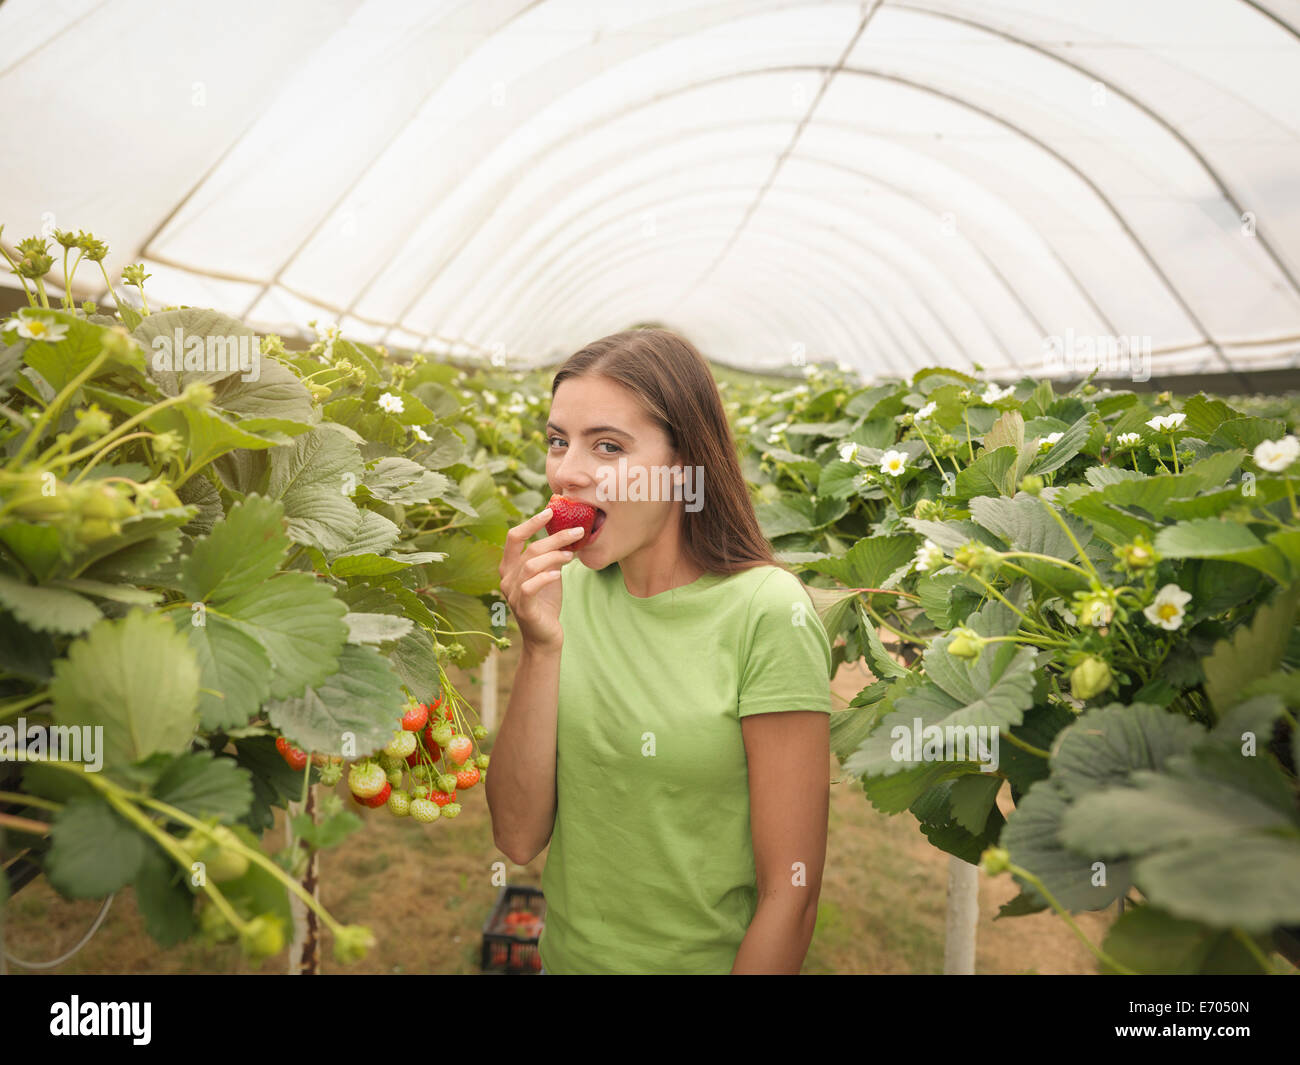 Portrait of strawberry picker eating strawberry in polytunnel on fruit farm Stock Photo